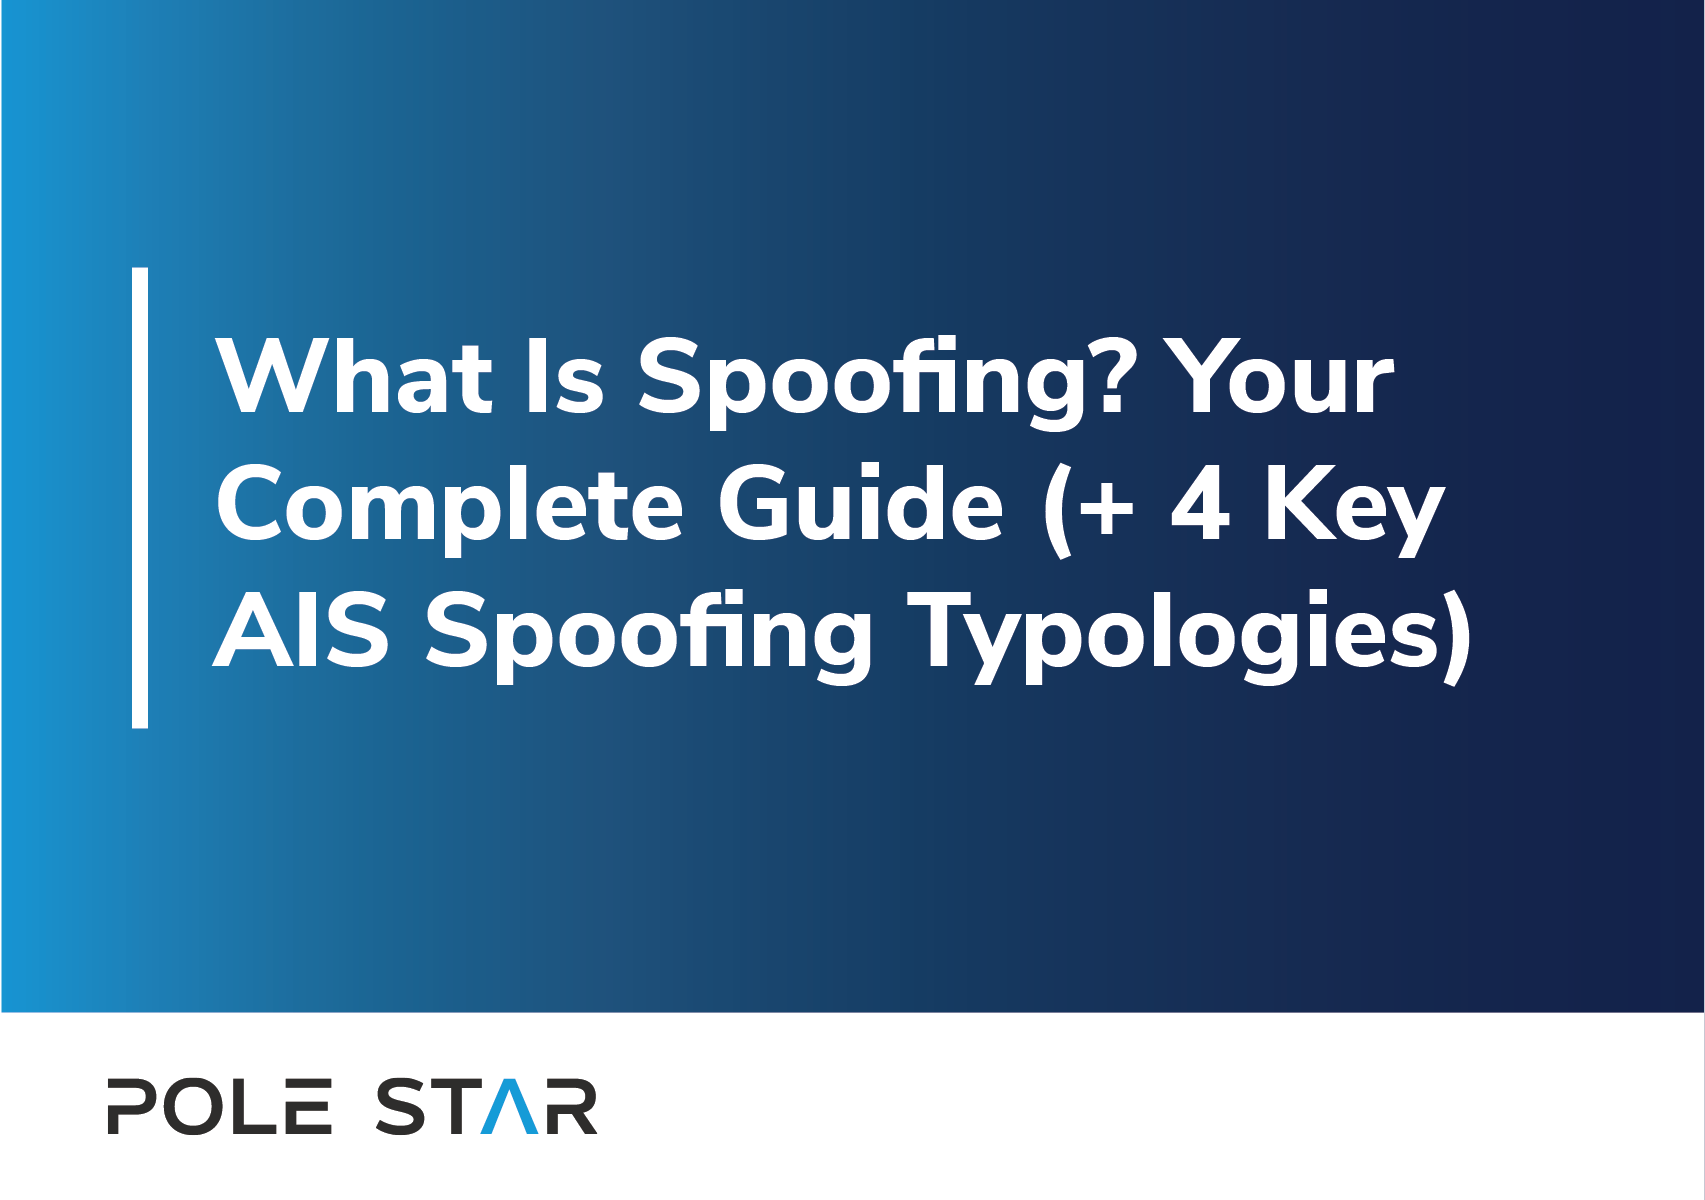 What Is Spoofing? Your Complete Guide (+ 4 Key AIS Spoofing Typologies).